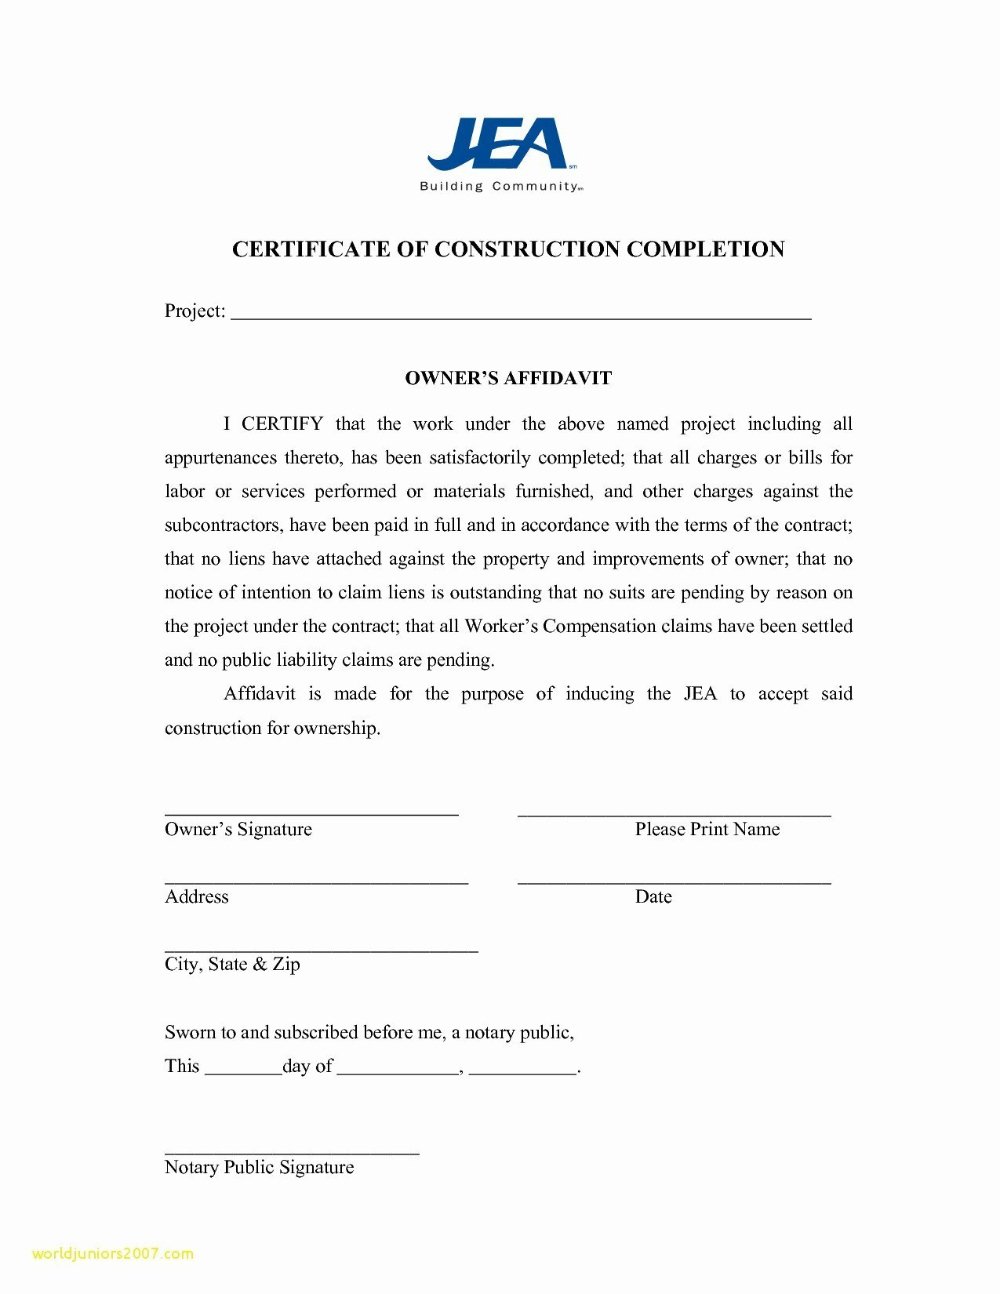 Practical Completion Certificate Template Jct Pertaining To Certificate Template For Project Completion